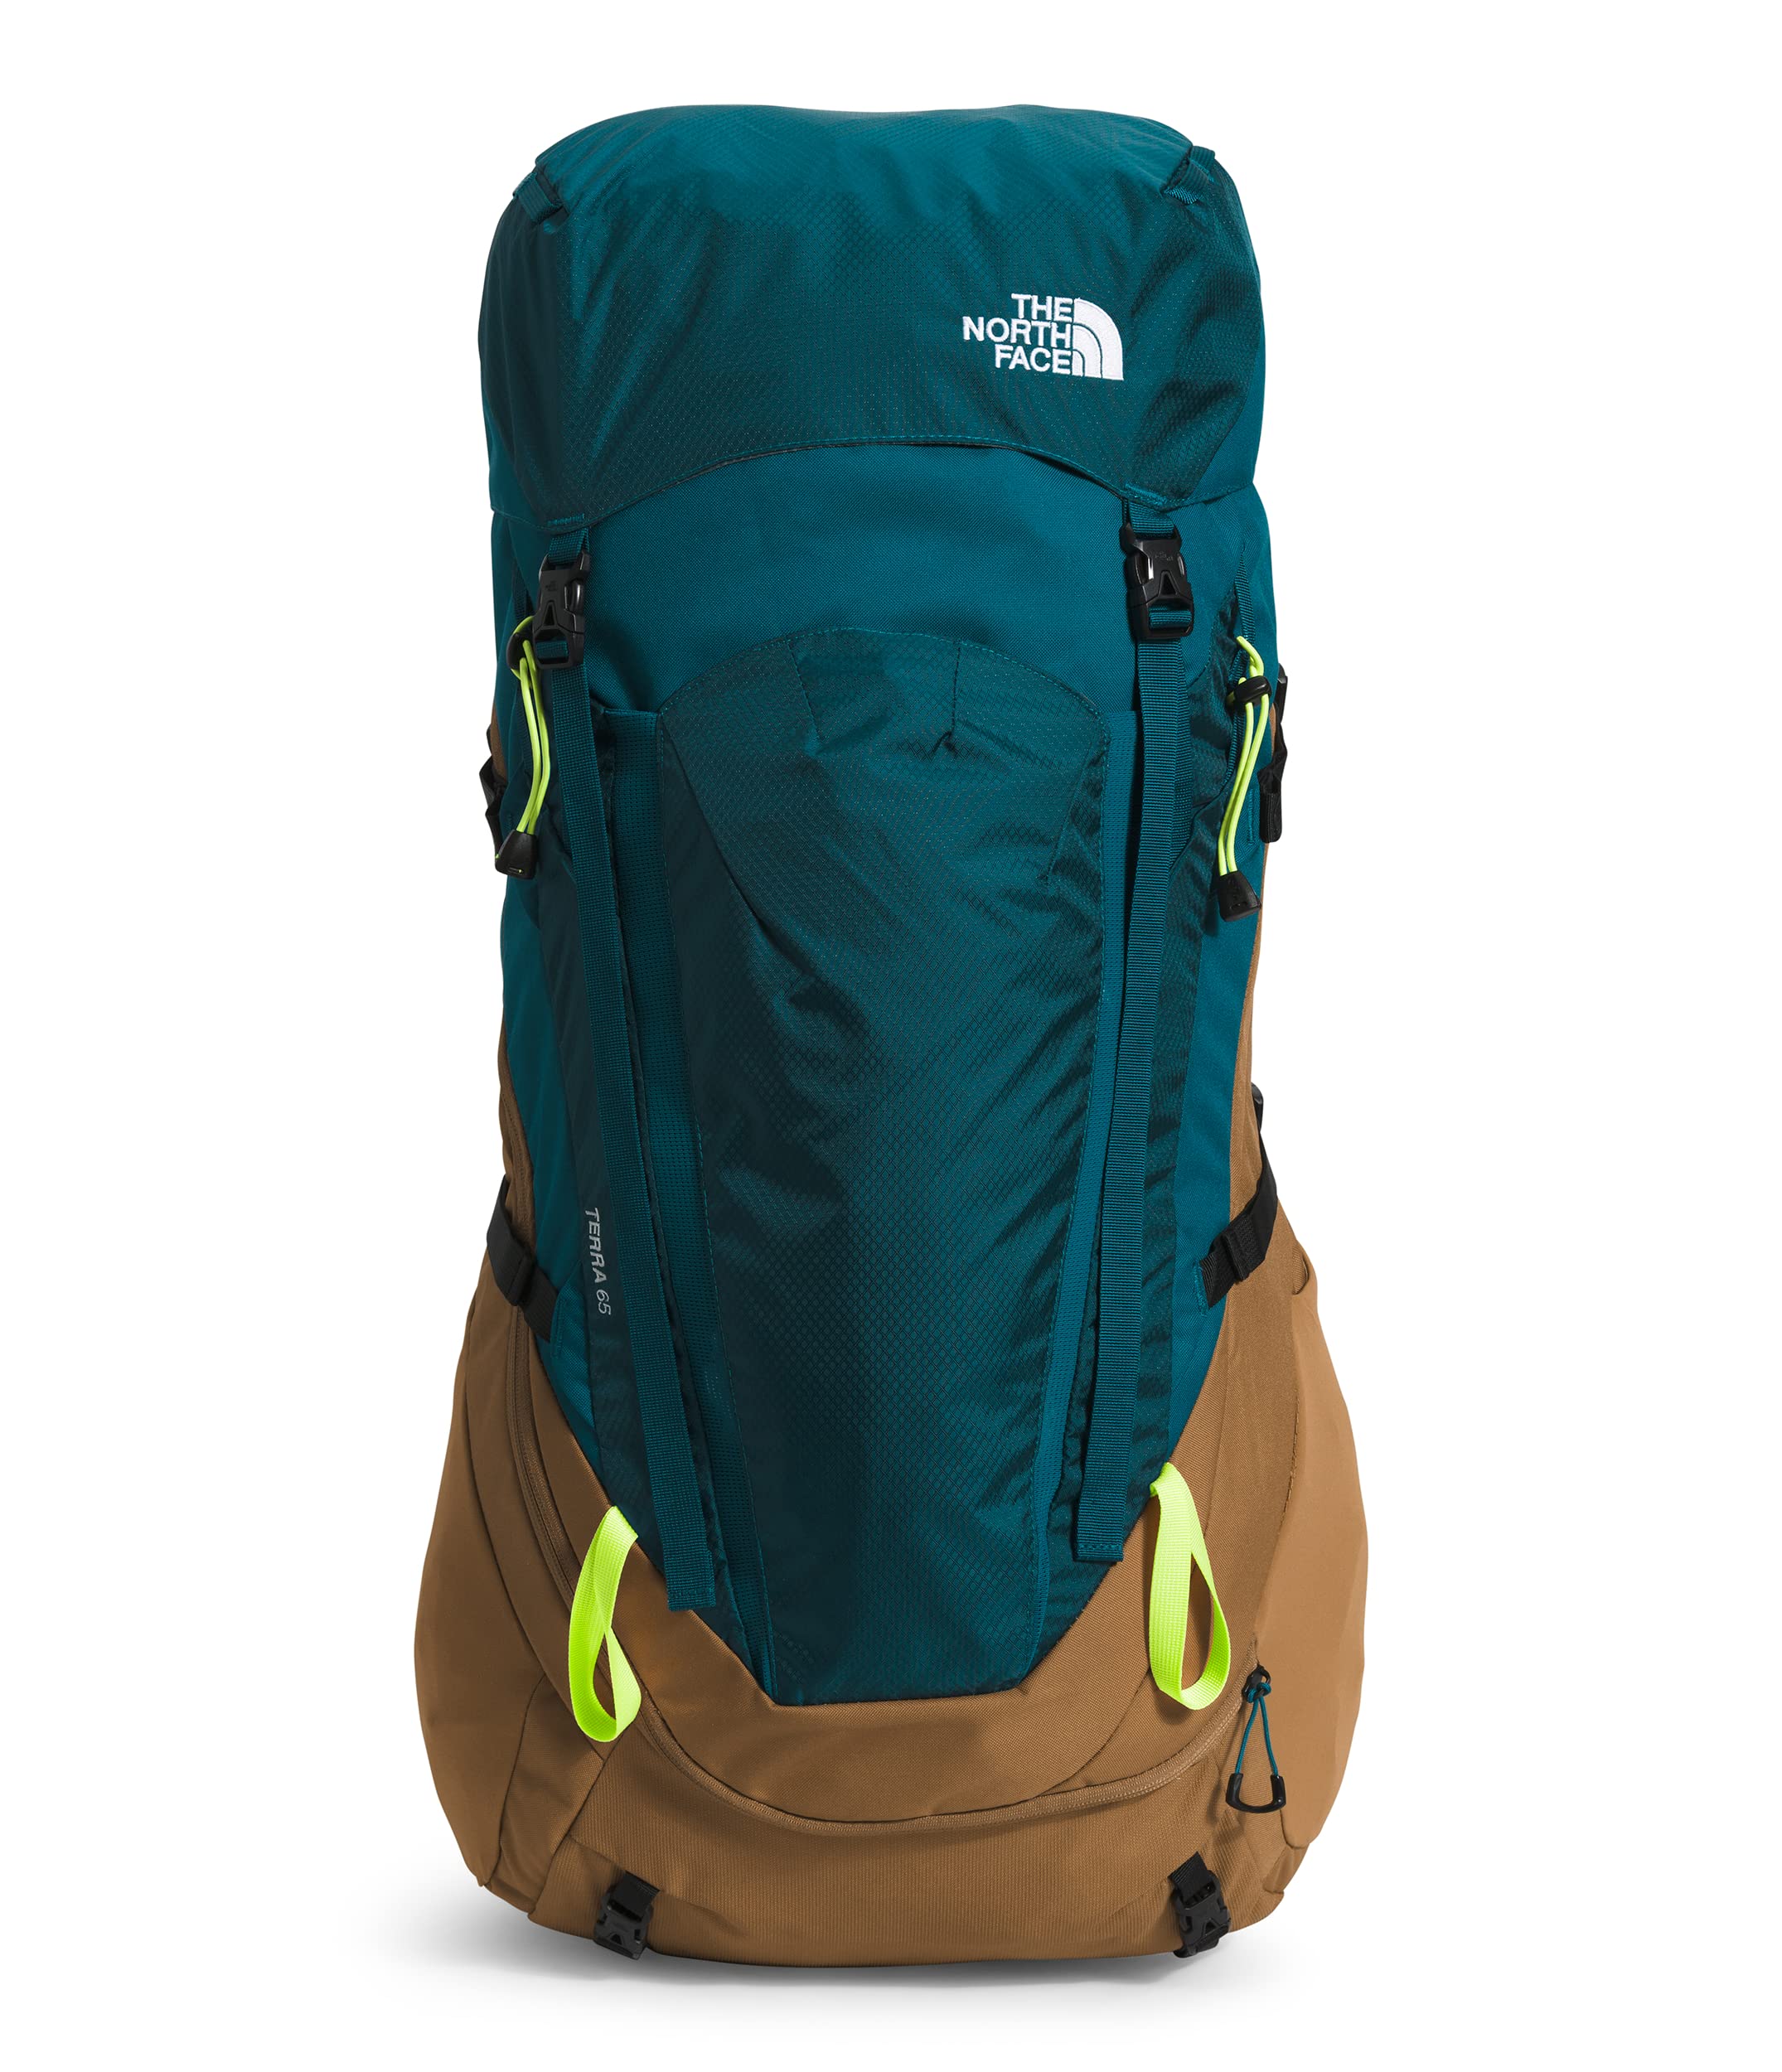 THE NORTH FACE Terra 65 L Backpacking Backpack, Blue Coral/Utility Brown/Led Yellow, L-XL 65L